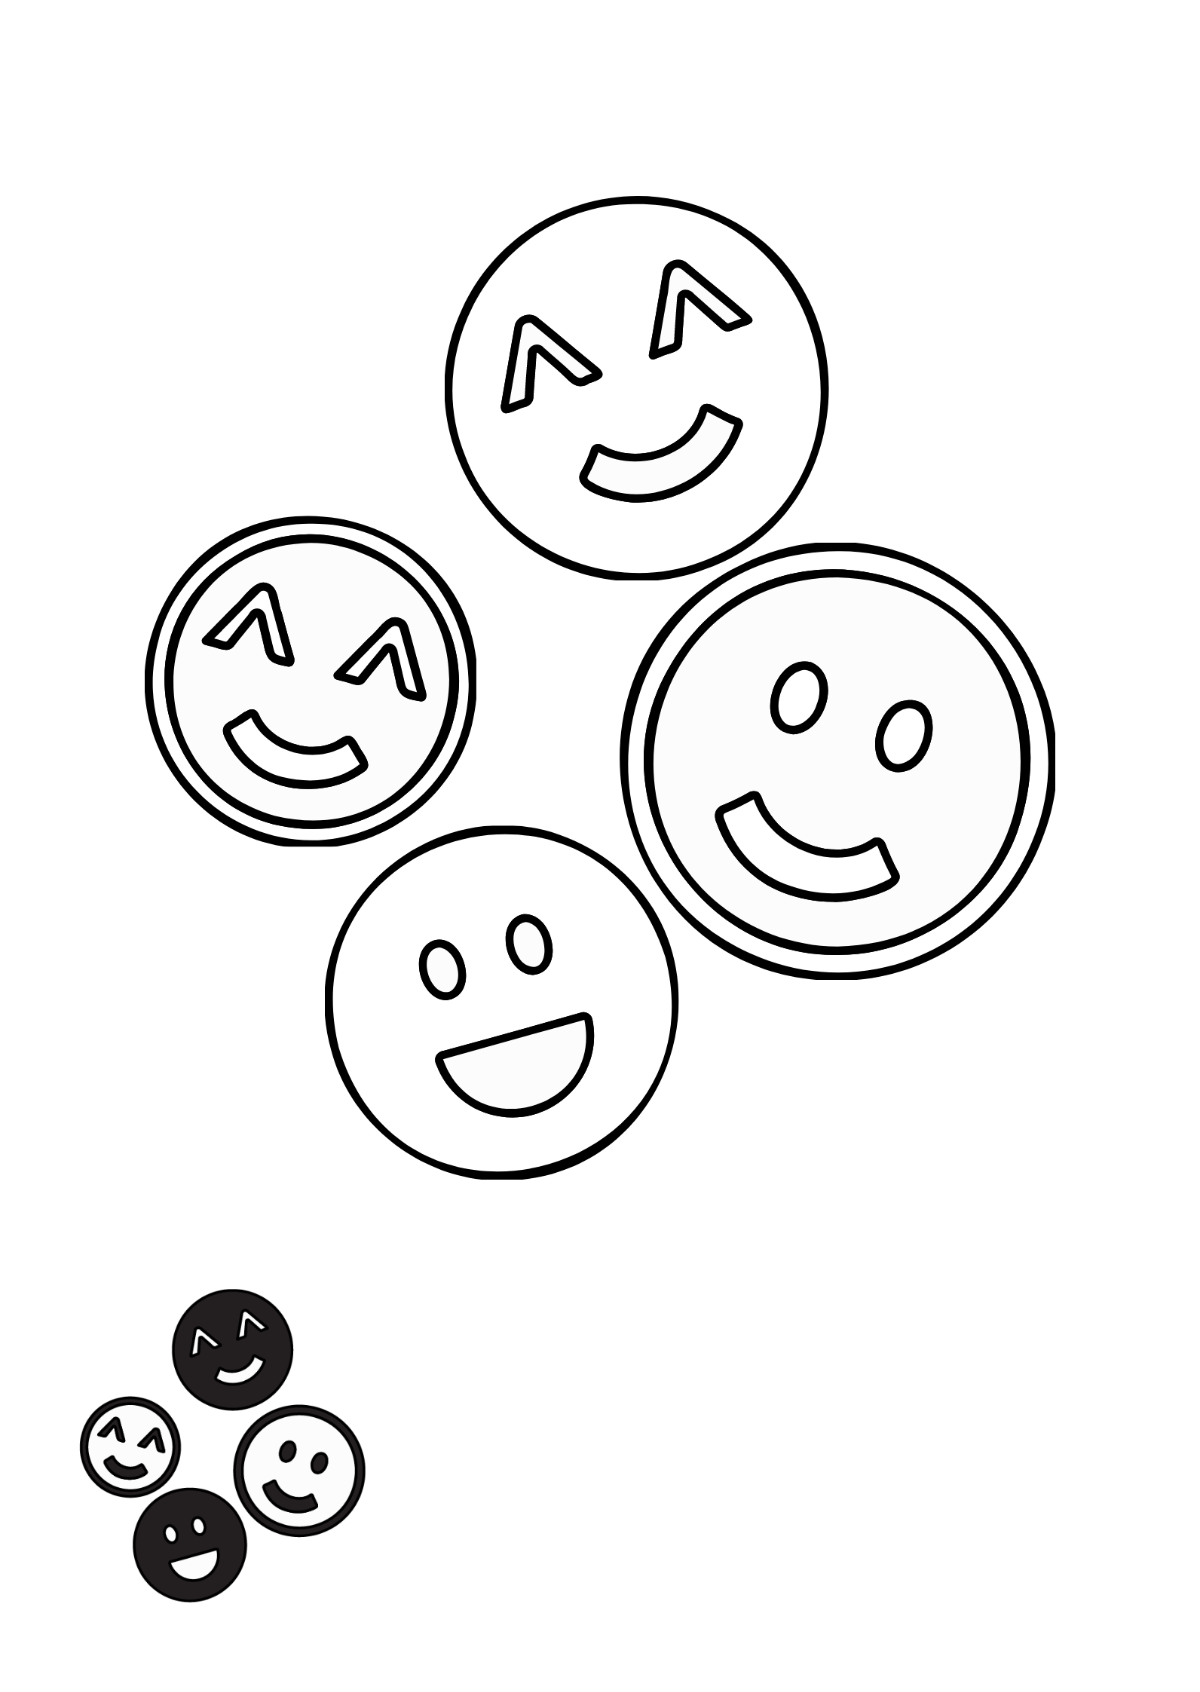 Black And White Smiley Face coloring page Template